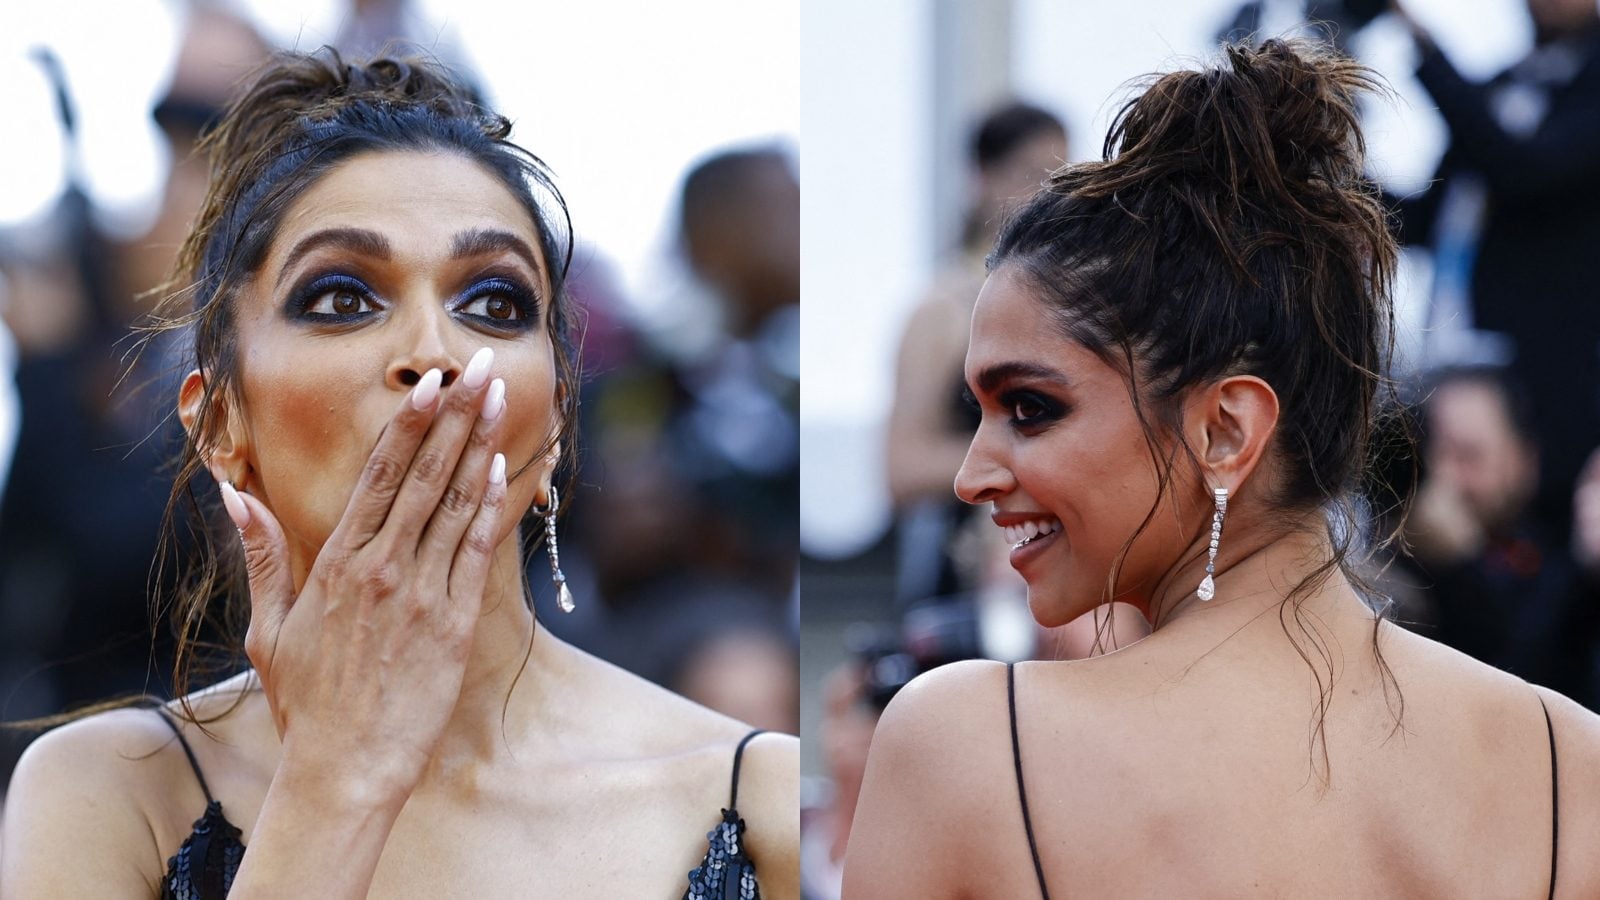 Deepika Padukone Sexy And Naked Video - Deepika Padukone Blows Kiss in Super Hot Embellished Gown on Cannes Red  Carpet; See Pics - News18